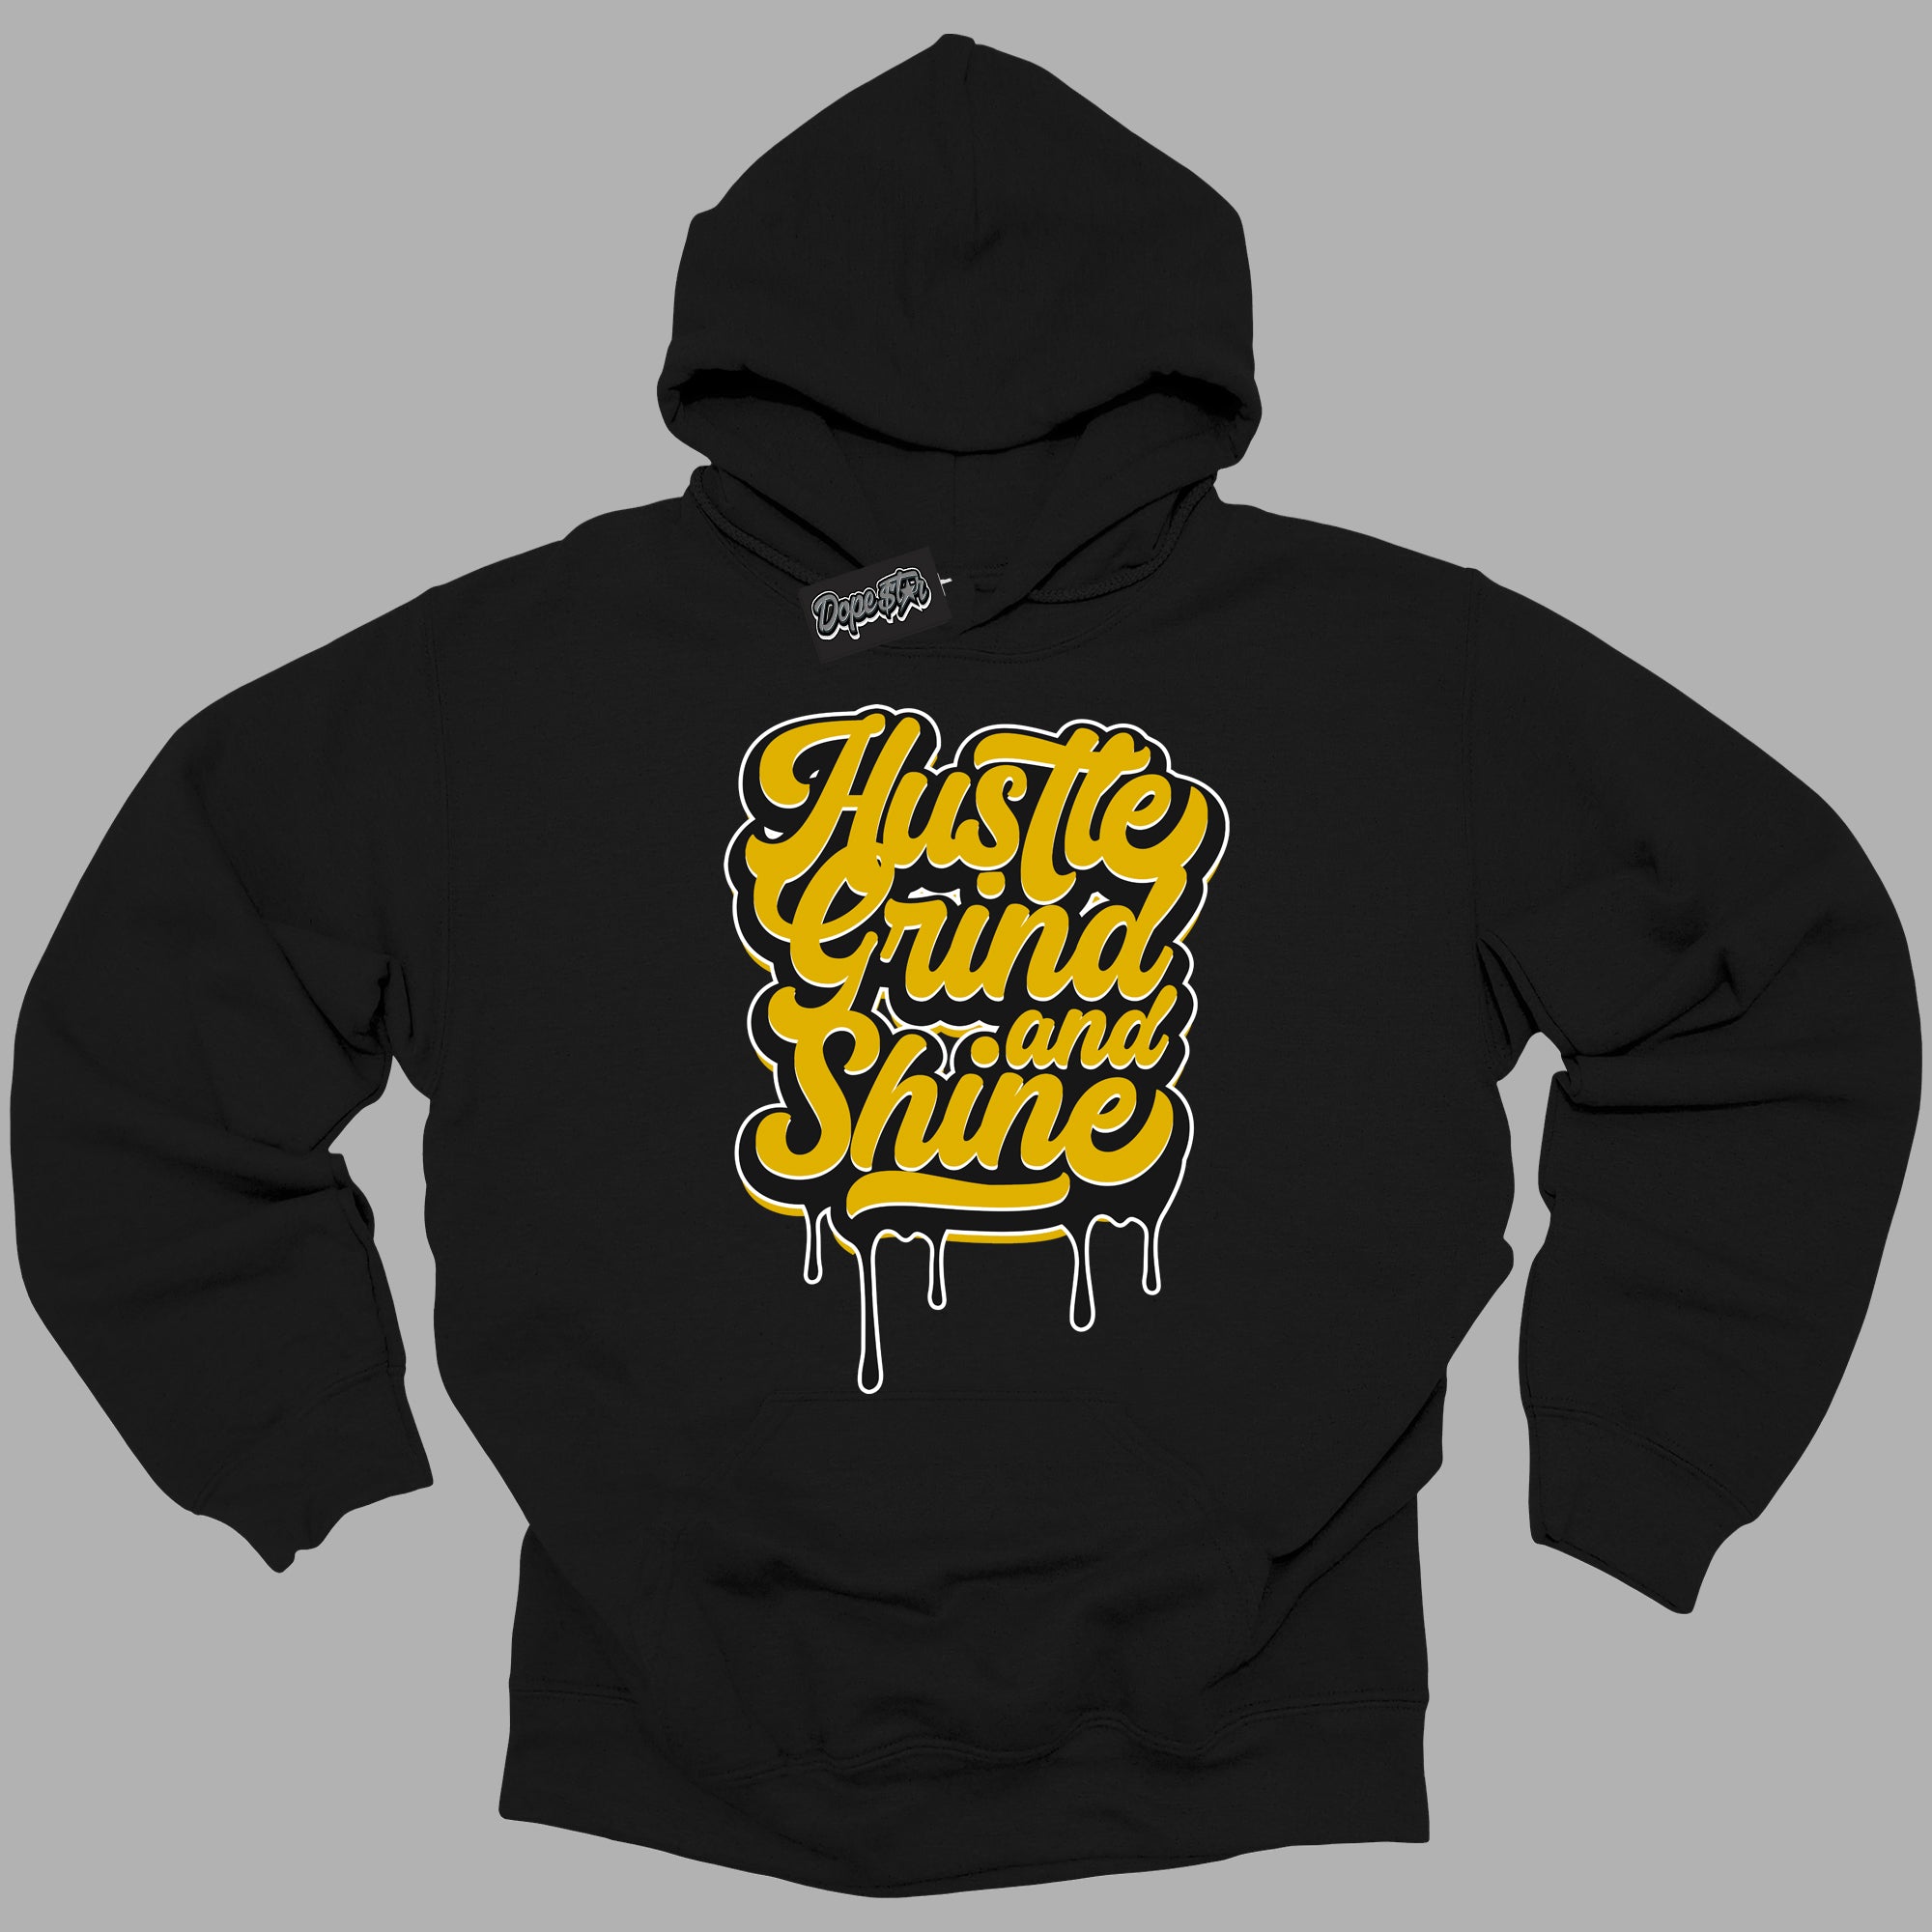 Cool Black Hoodie with “ Hustle Grind And Shine ”  design that Perfectly Matches Yellow Ochre 6s Sneakers.